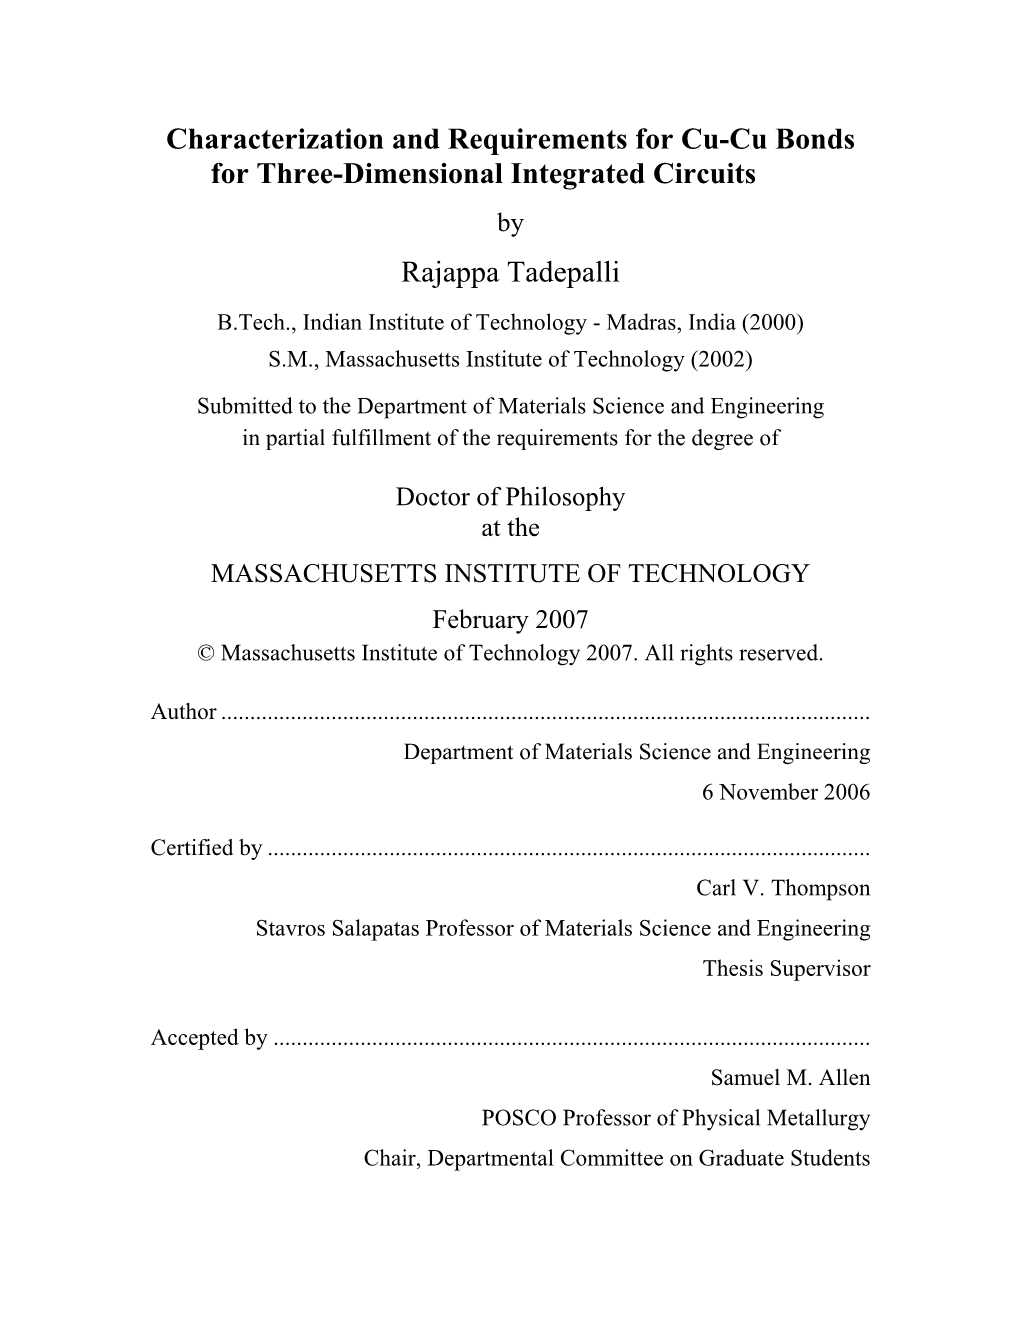 Characterization and Requirements for Cu-Cu Bonds for Three-Dimensional Integrated Circuits by Rajappa Tadepalli